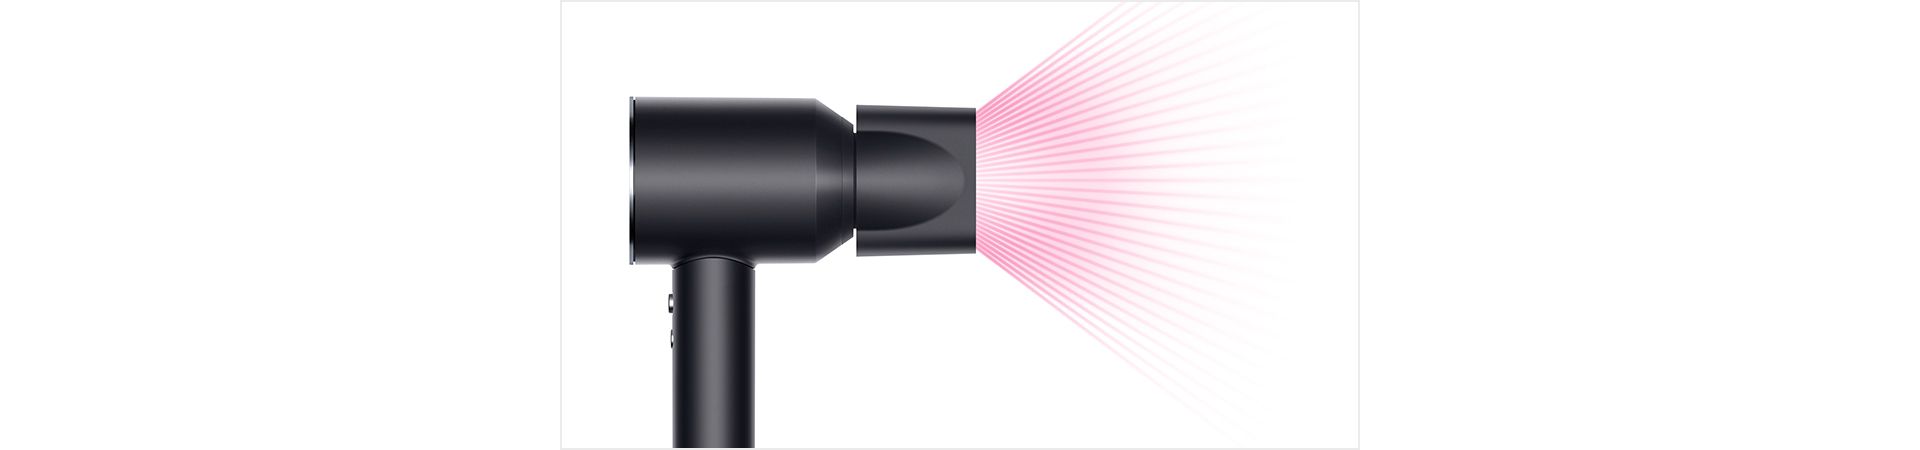 Dyson Supersonic™ hair dryer Black/Nickel with Wide tooth comb attachment